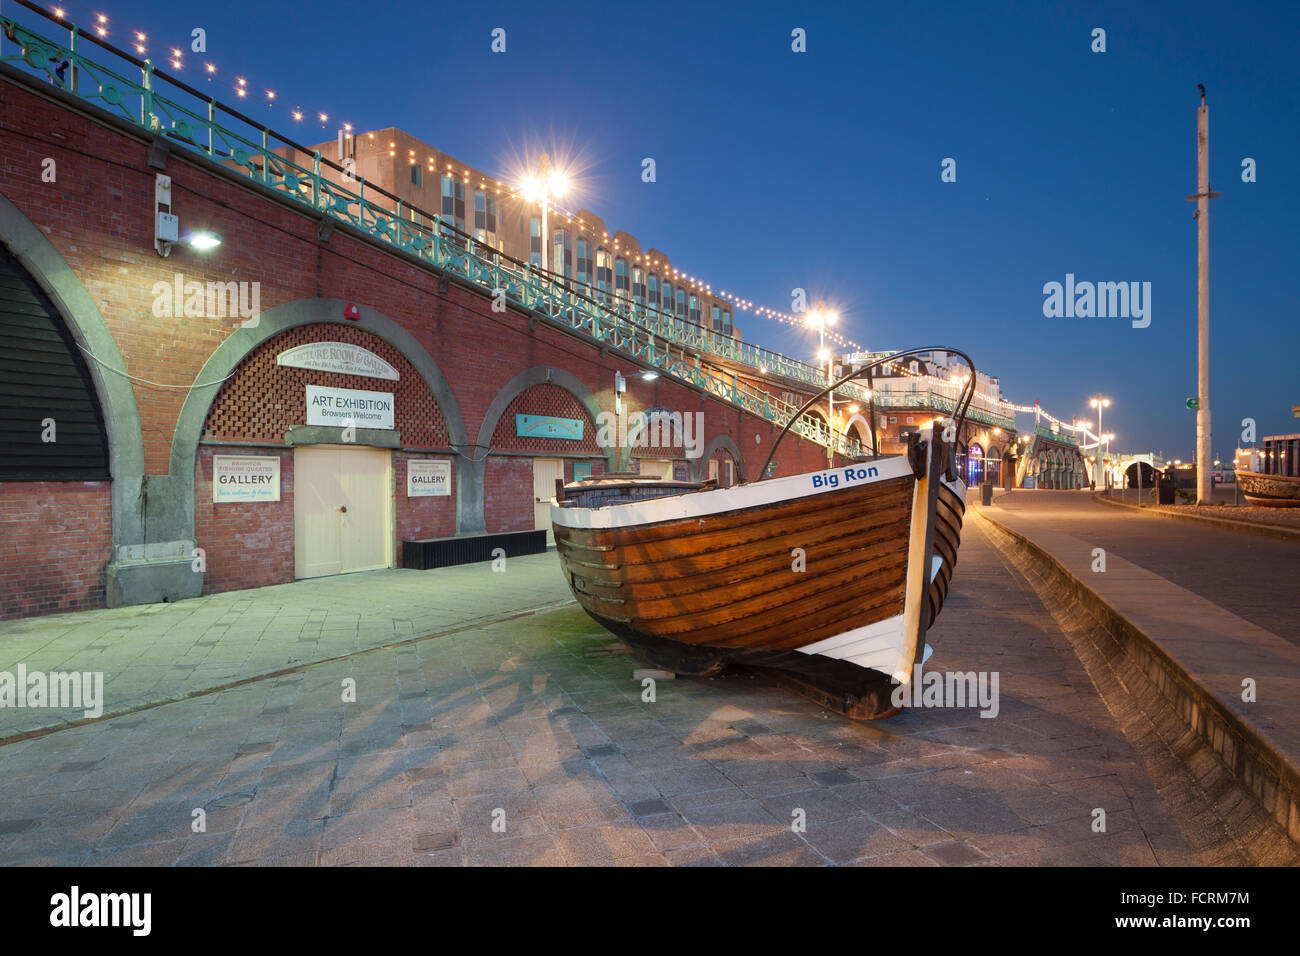 https://c8.alamy.com/comp/FCRM7M/winter-evening-at-fishing-museum-on-brighton-seafront-east-sussex-FCRM7M.jpg